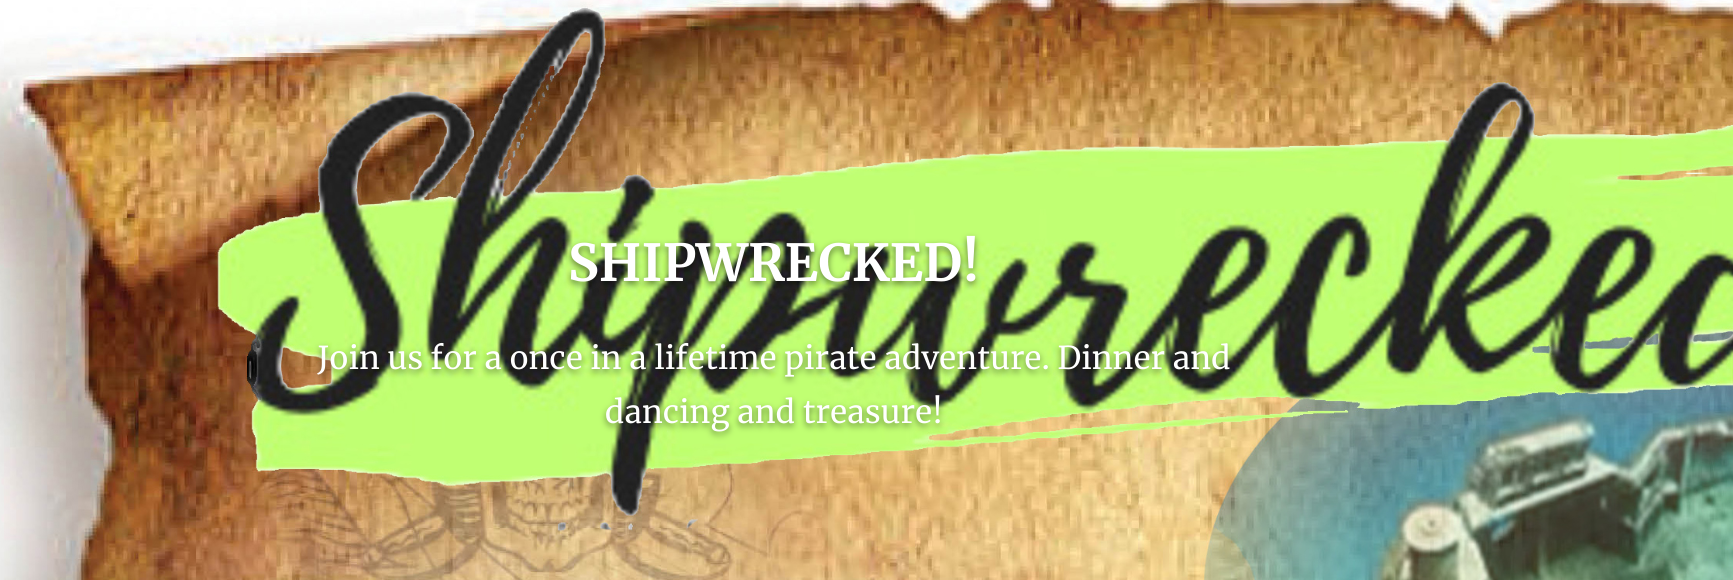 a piece of wood with the words shipwrecked on it.